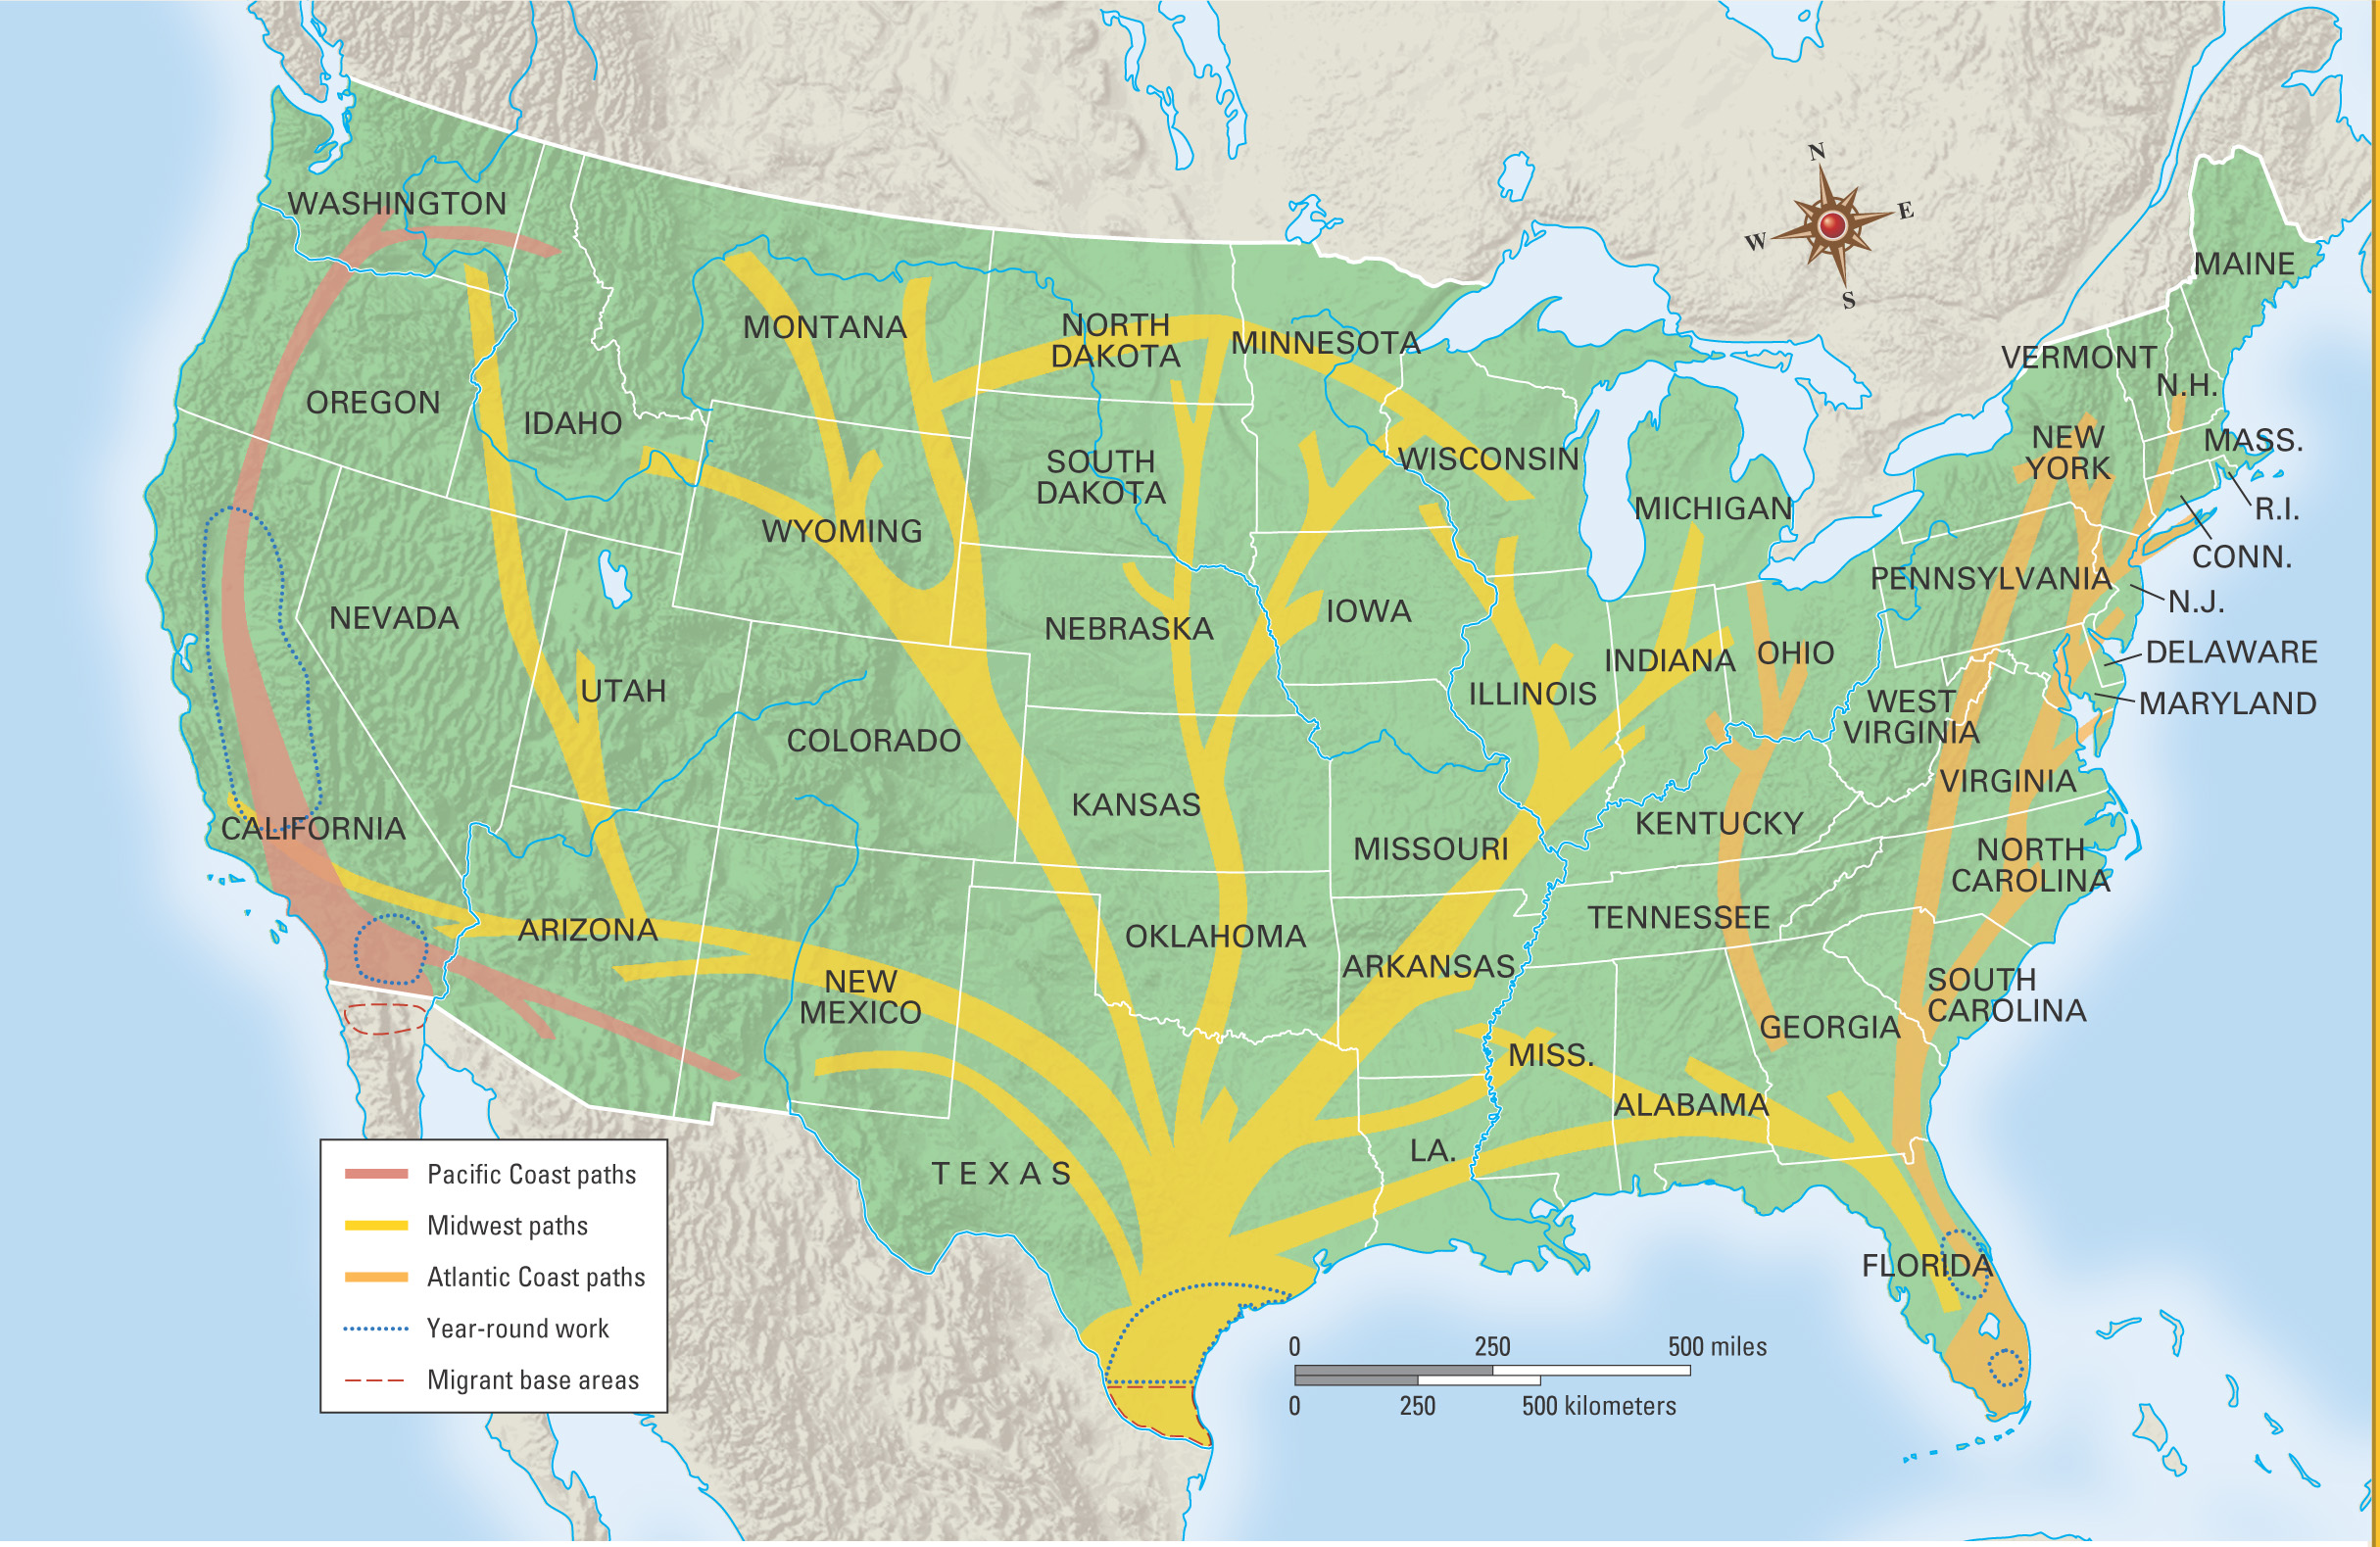 A map shows paths of migrant workers in the U.S.